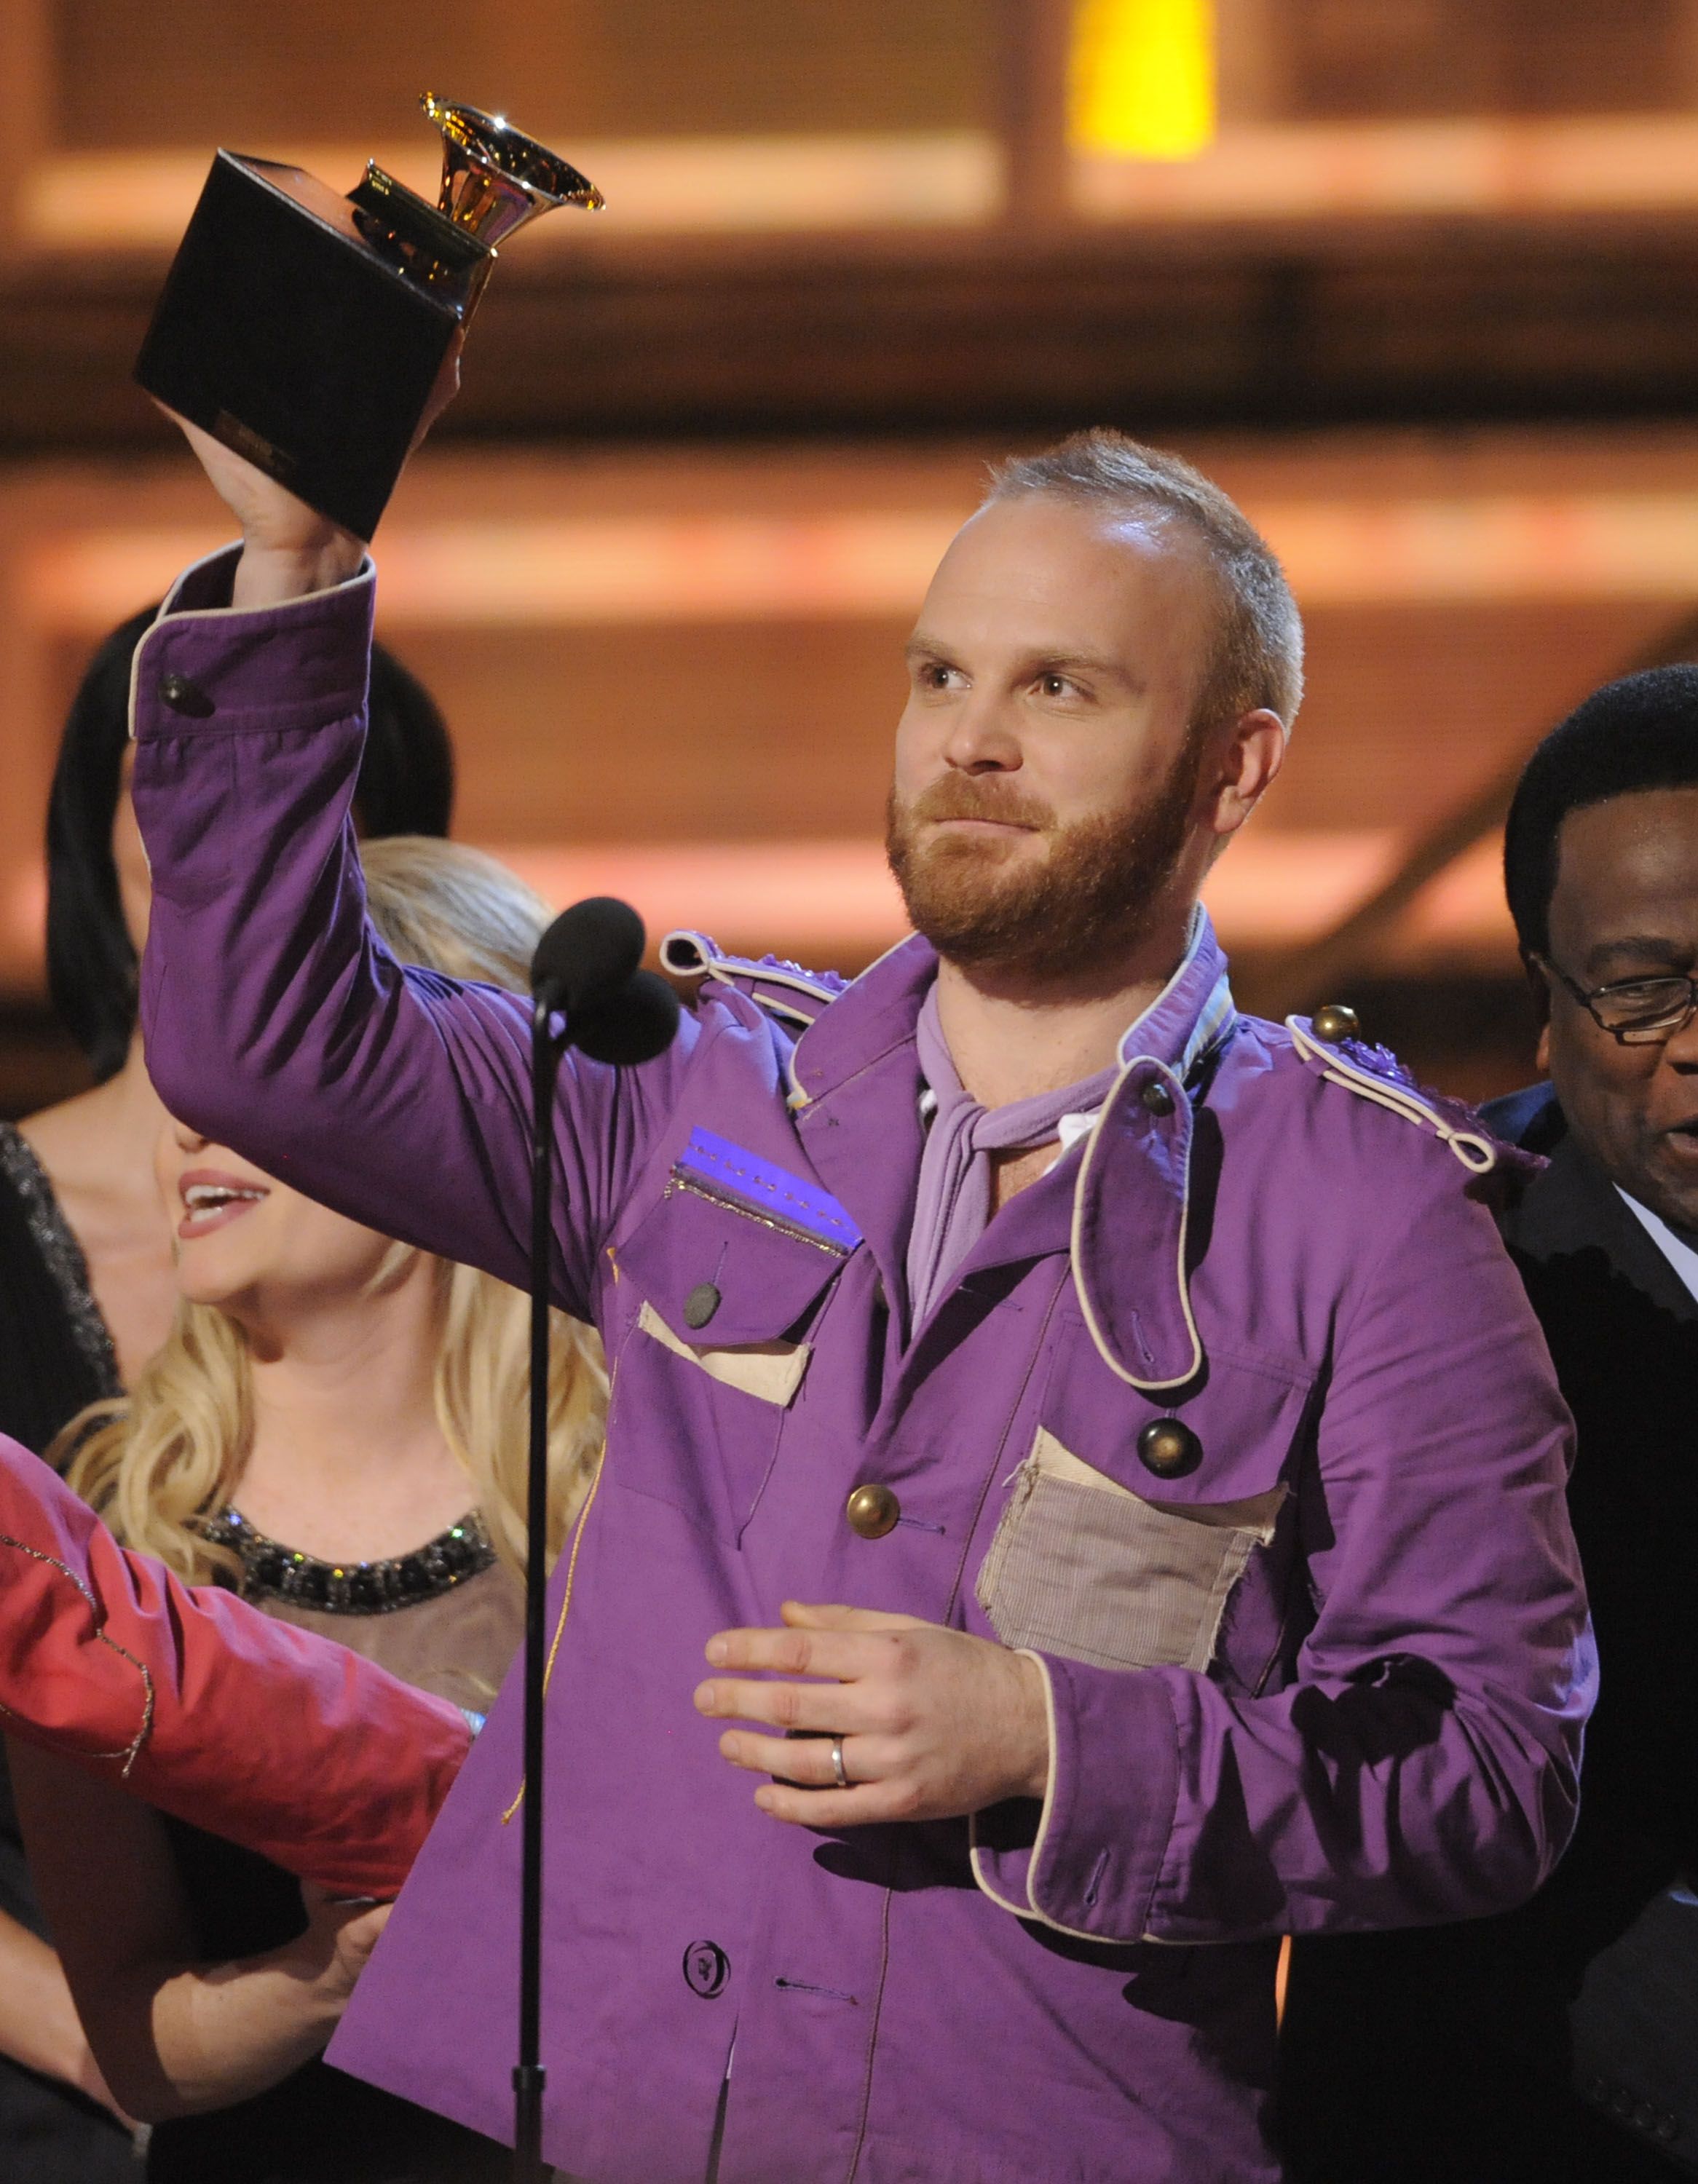 Game of Thrones' casts Coldplay drummer Will Champion in season 3